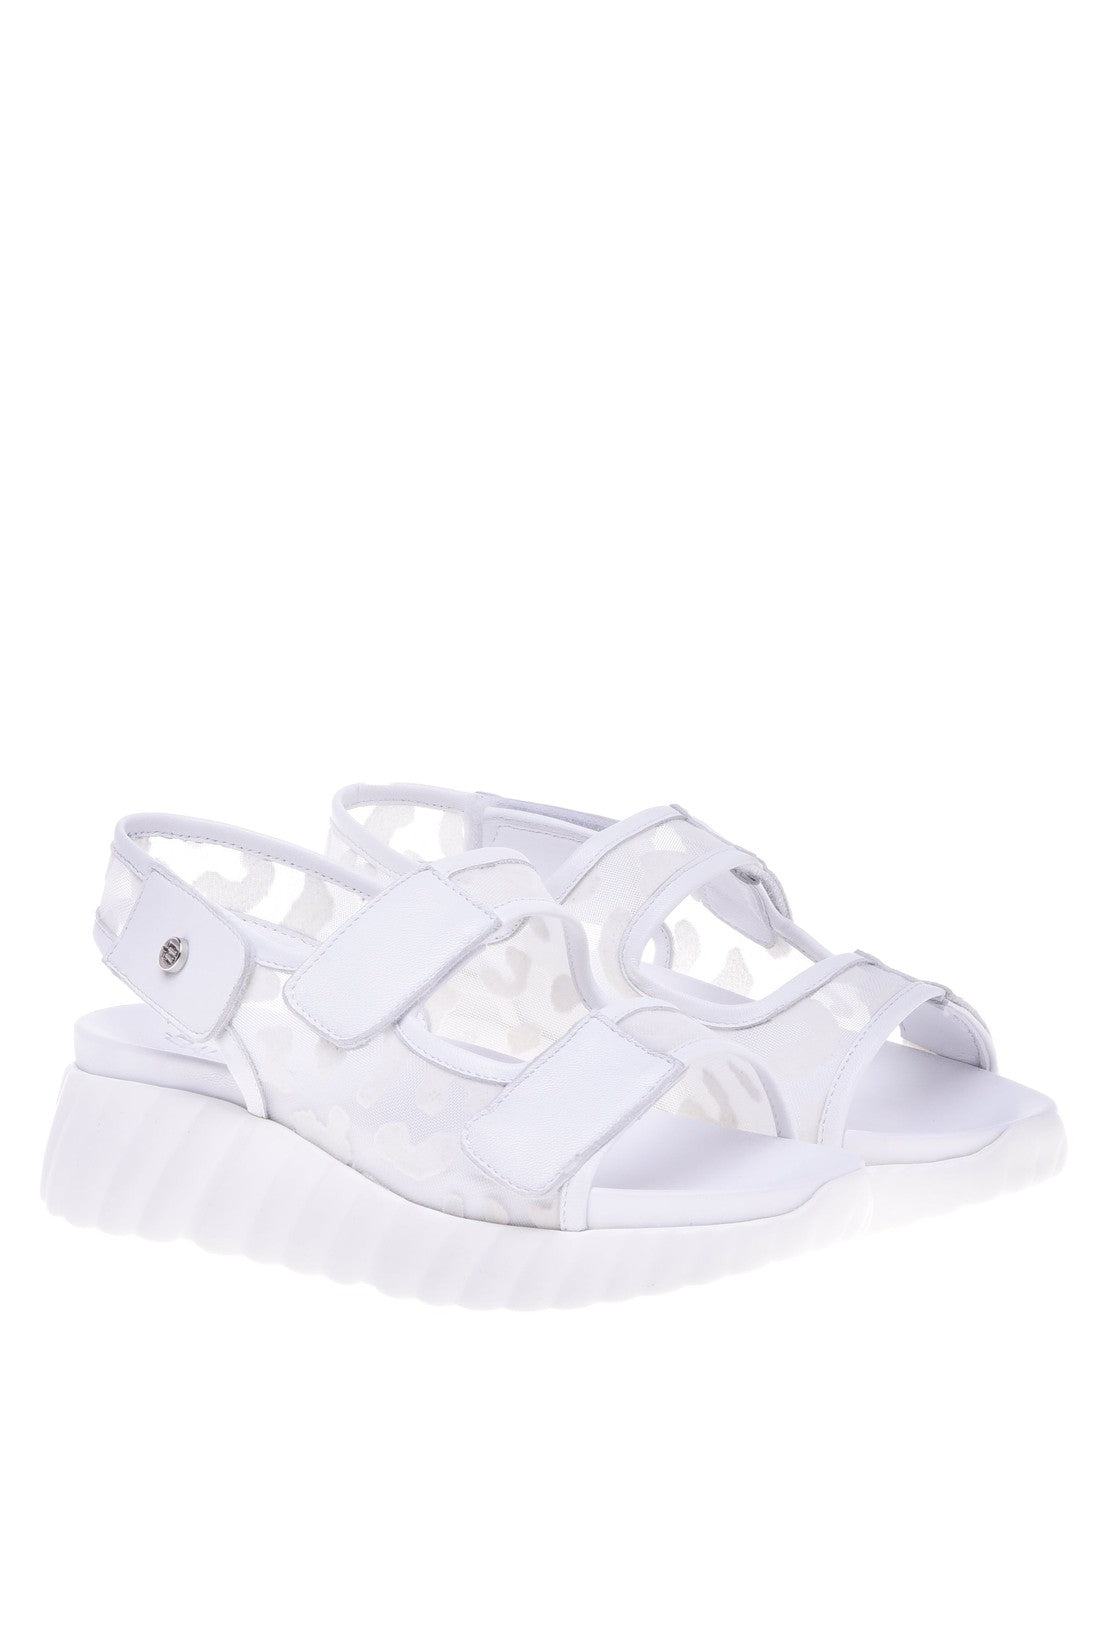 Sandal in white nappa leather and lace